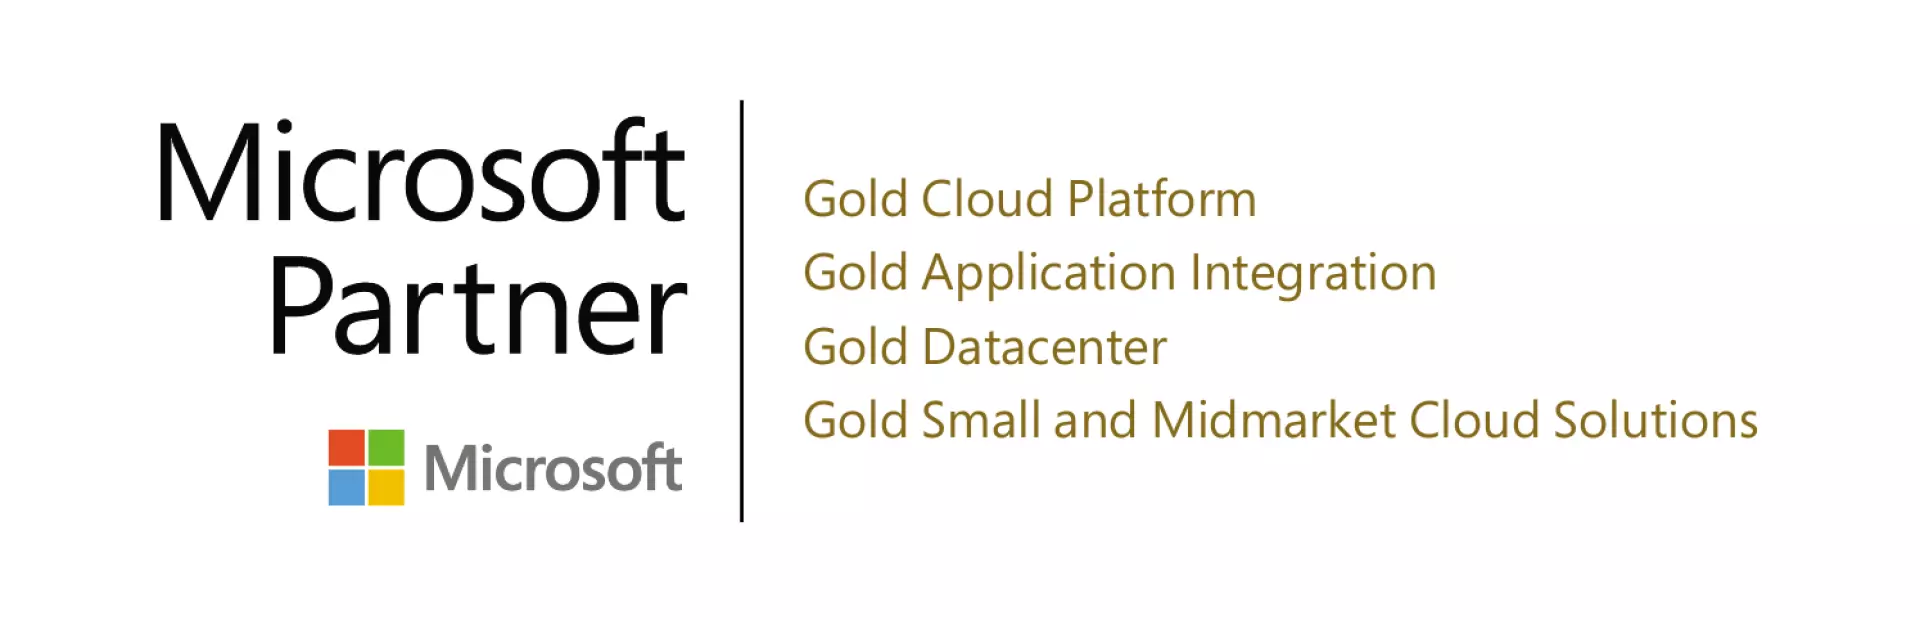 Microsoft Gold Partner and Competencies 2021-22